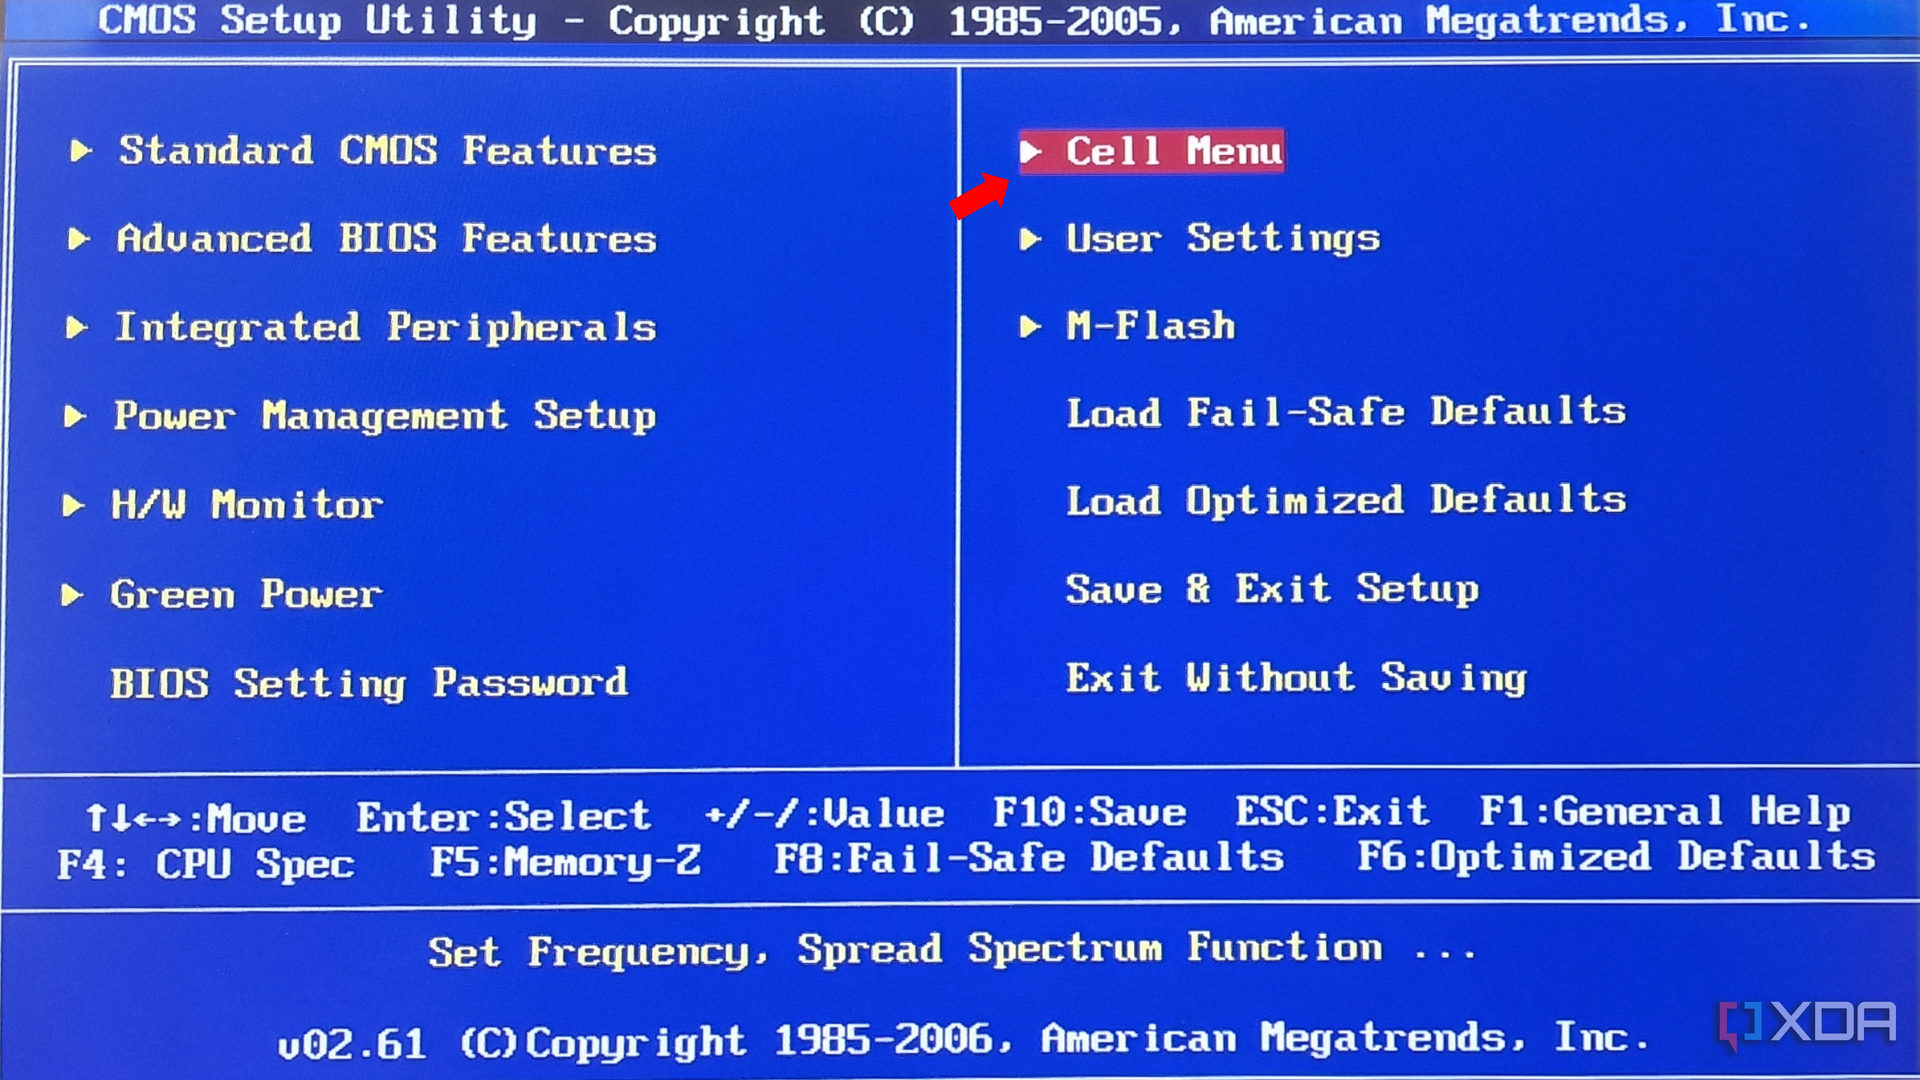 The main menu of BIOS setup with various options, including an arrow pointing to the "Cell Menu."